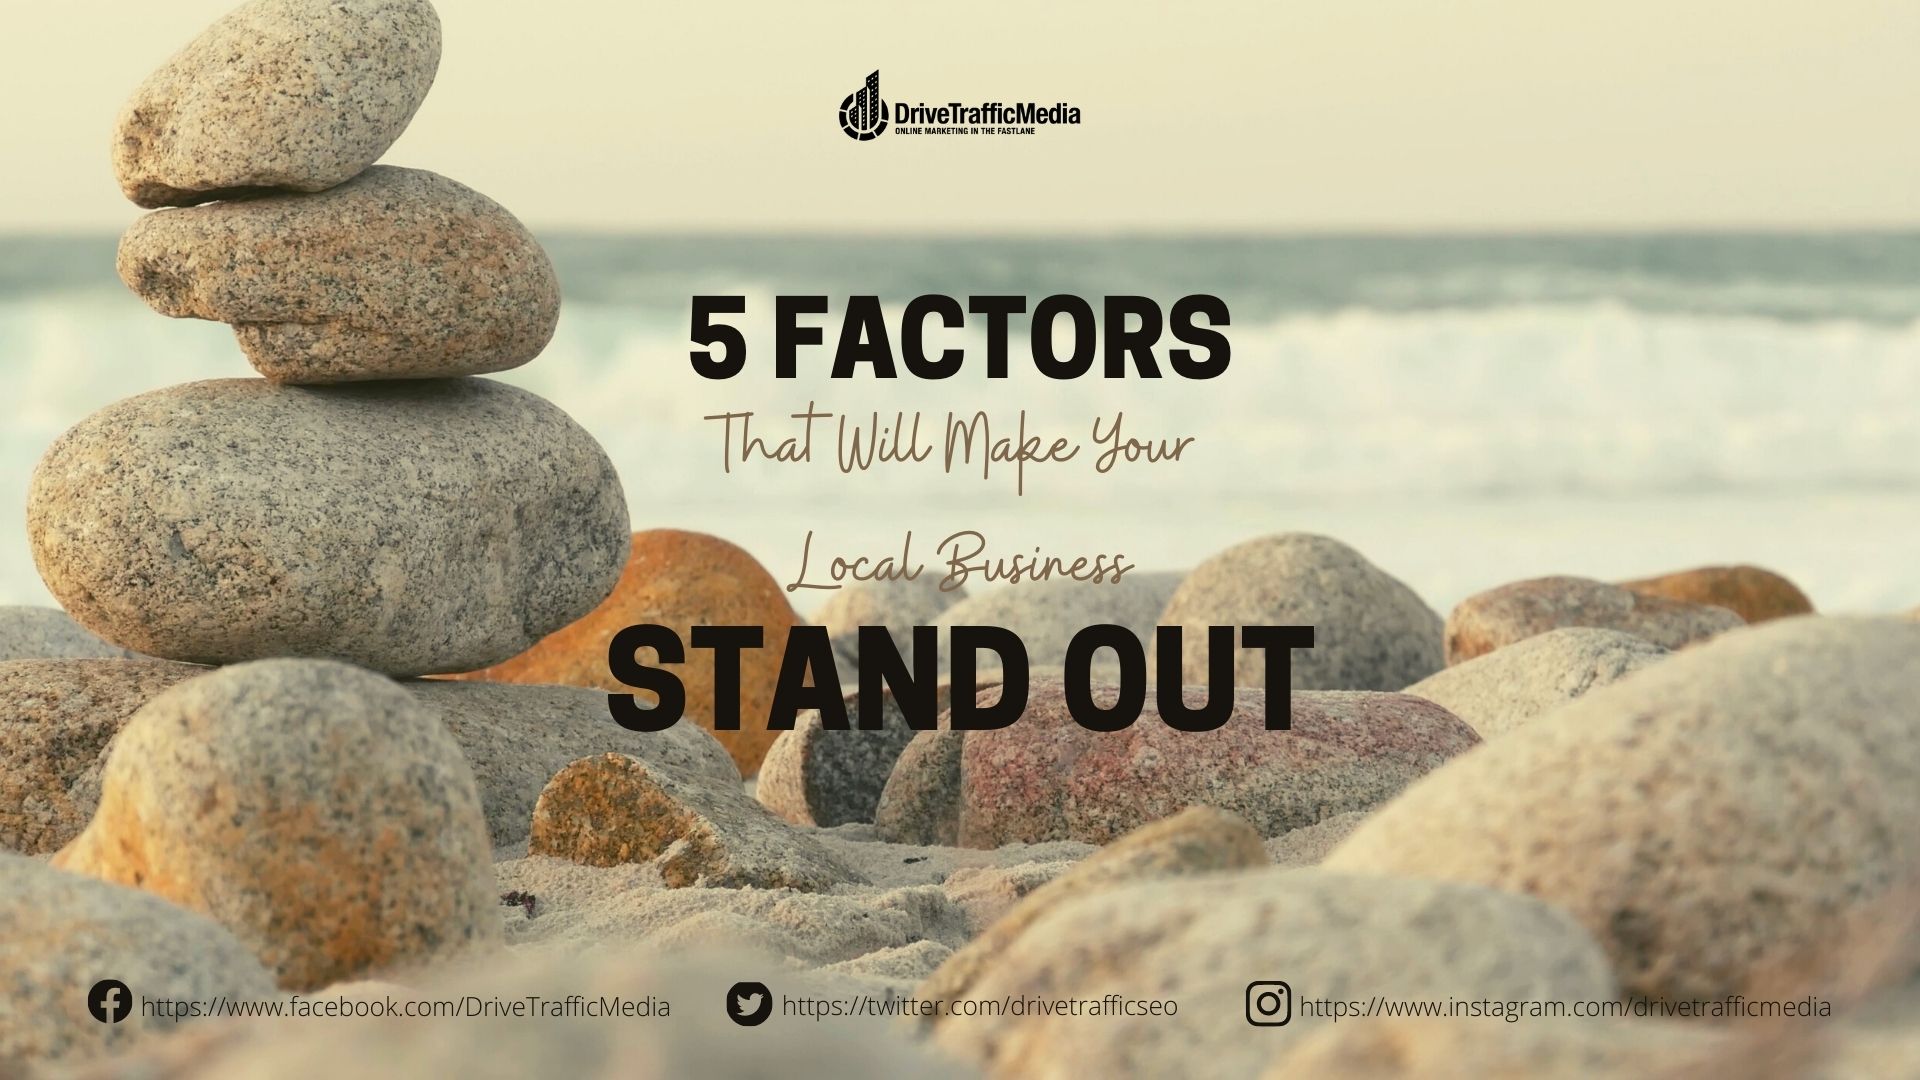 factors-that-will-make-your-business-stand-out-according-to-a-digital-marketing-agency-in-orange-county